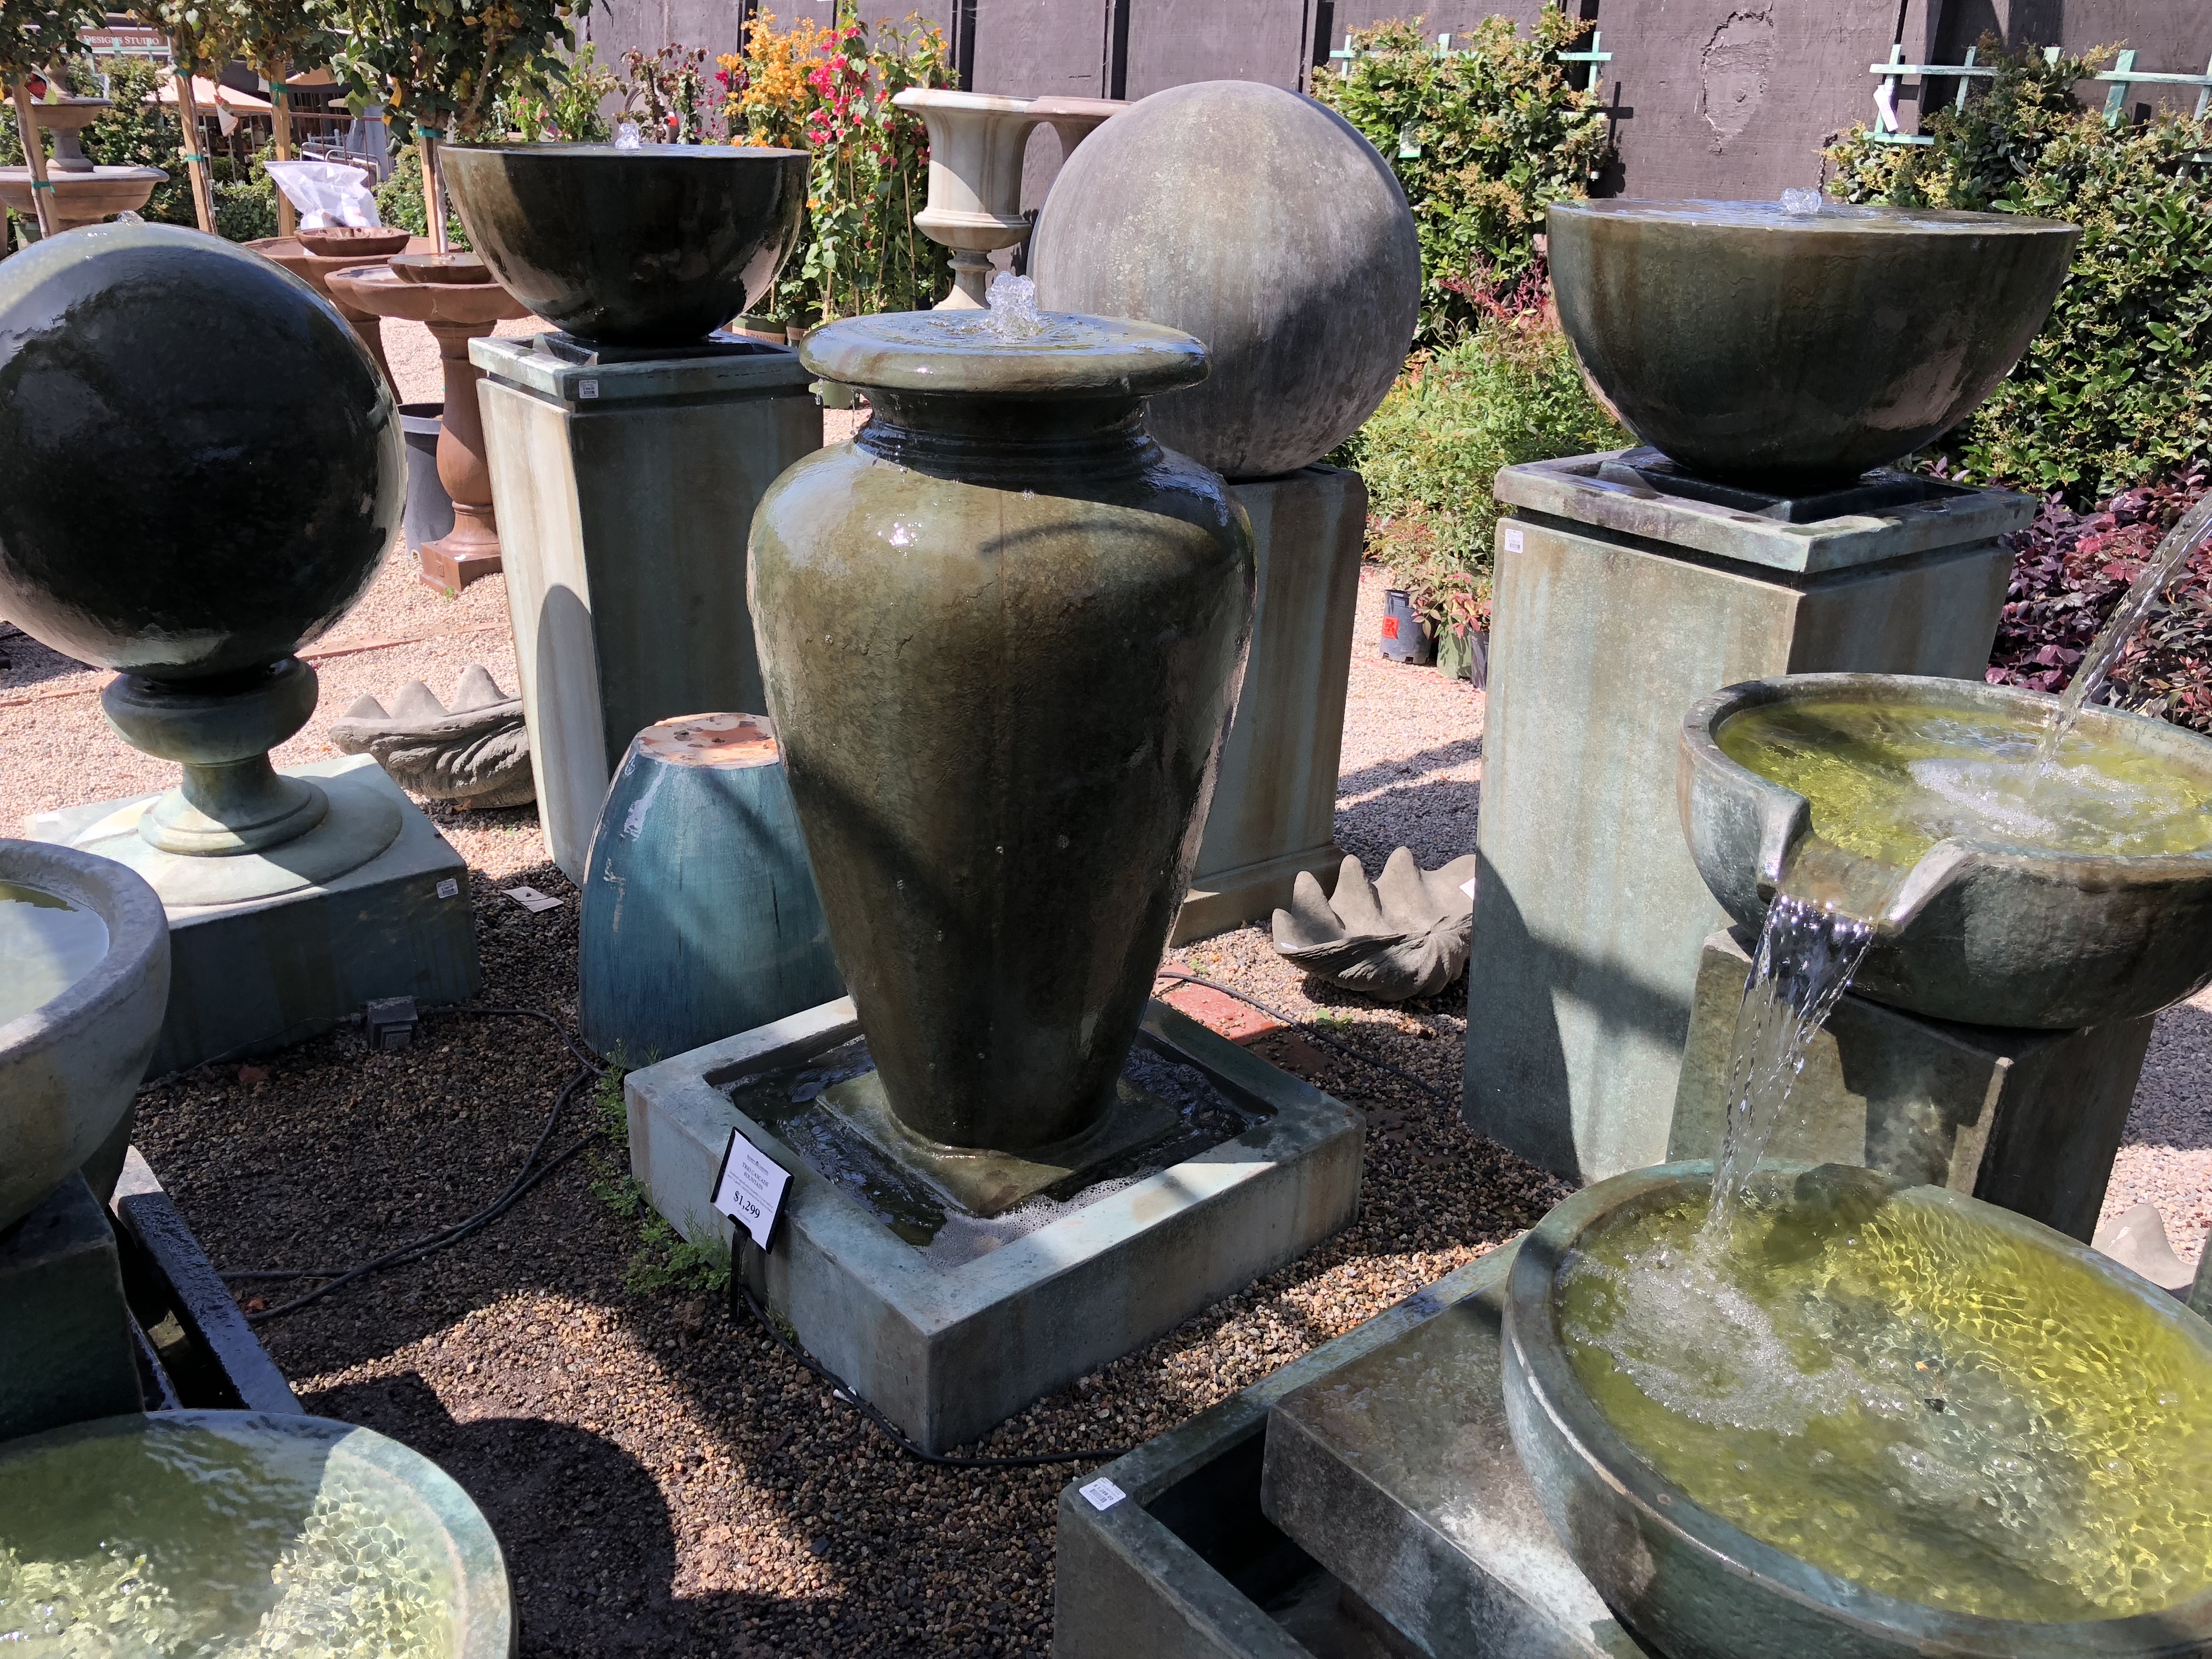 Roger's Gardens Newport Beach - Small Sample of Fountains for Sale